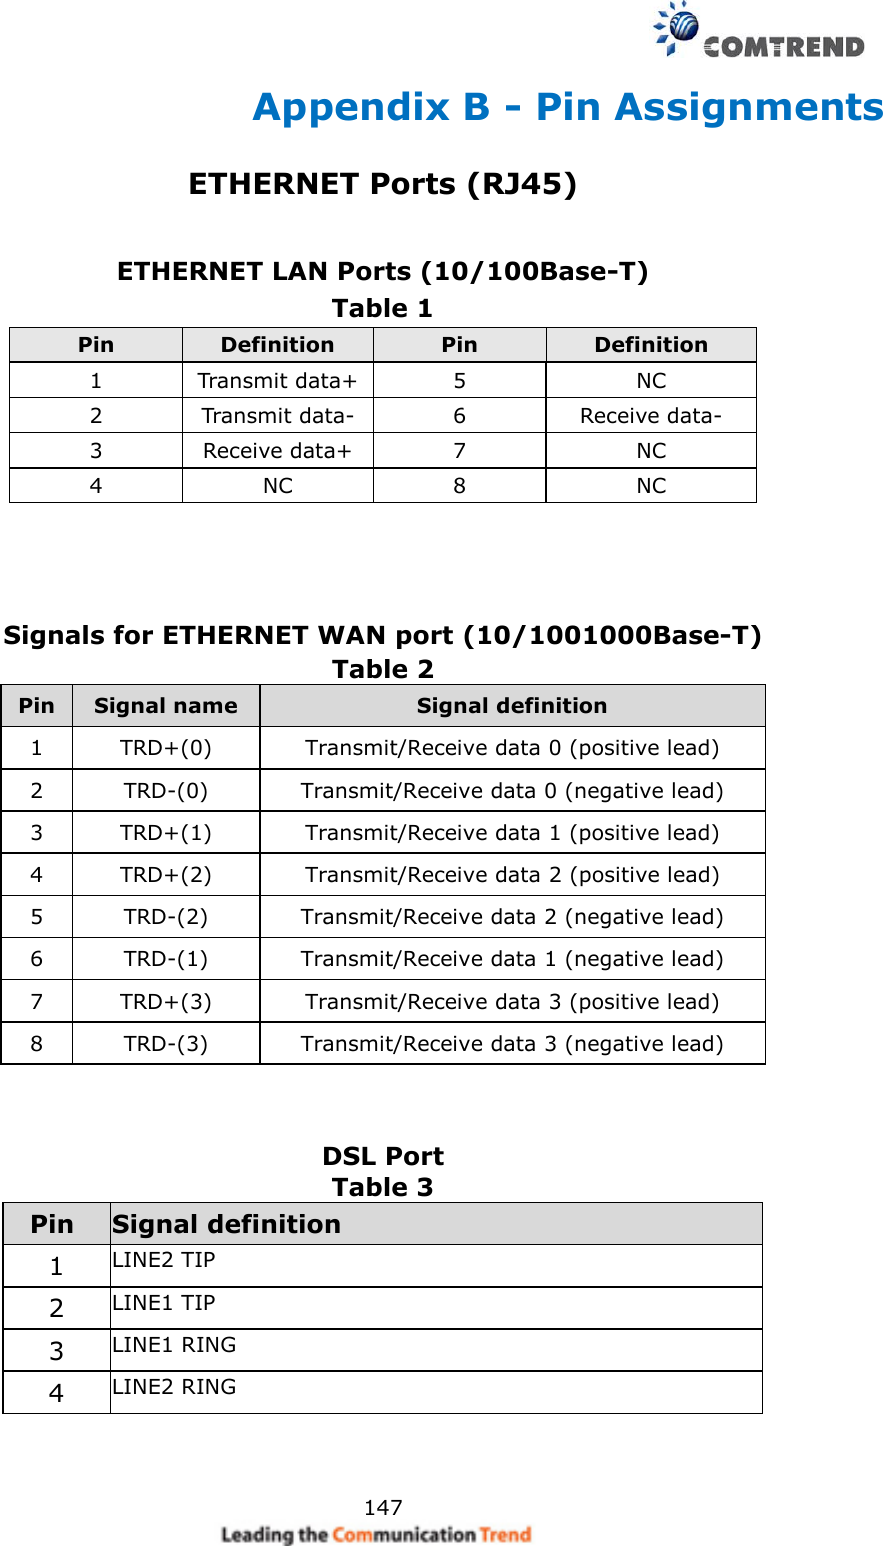     147 Appendix B - Pin Assignments ETHERNET Ports (RJ45)   ETHERNET LAN Ports (10/100Base-T) Table 1 Pin Definition Pin Definition 1 Transmit data+ 5 NC 2 Transmit data- 6 Receive data- 3 Receive data+ 7 NC 4 NC 8 NC      Signals for ETHERNET WAN port (10/1001000Base-T) Table 2     Pin Signal name Signal definition 1 TRD+(0) Transmit/Receive data 0 (positive lead) 2 TRD-(0) Transmit/Receive data 0 (negative lead) 3 TRD+(1) Transmit/Receive data 1 (positive lead) 4 TRD+(2) Transmit/Receive data 2 (positive lead) 5 TRD-(2) Transmit/Receive data 2 (negative lead) 6 TRD-(1) Transmit/Receive data 1 (negative lead) 7 TRD+(3) Transmit/Receive data 3 (positive lead) 8 TRD-(3) Transmit/Receive data 3 (negative lead)    DSL Port Table 3   Pin Signal definition 1 LINE2 TIP 2 LINE1 TIP 3 LINE1 RING 4 LINE2 RING   